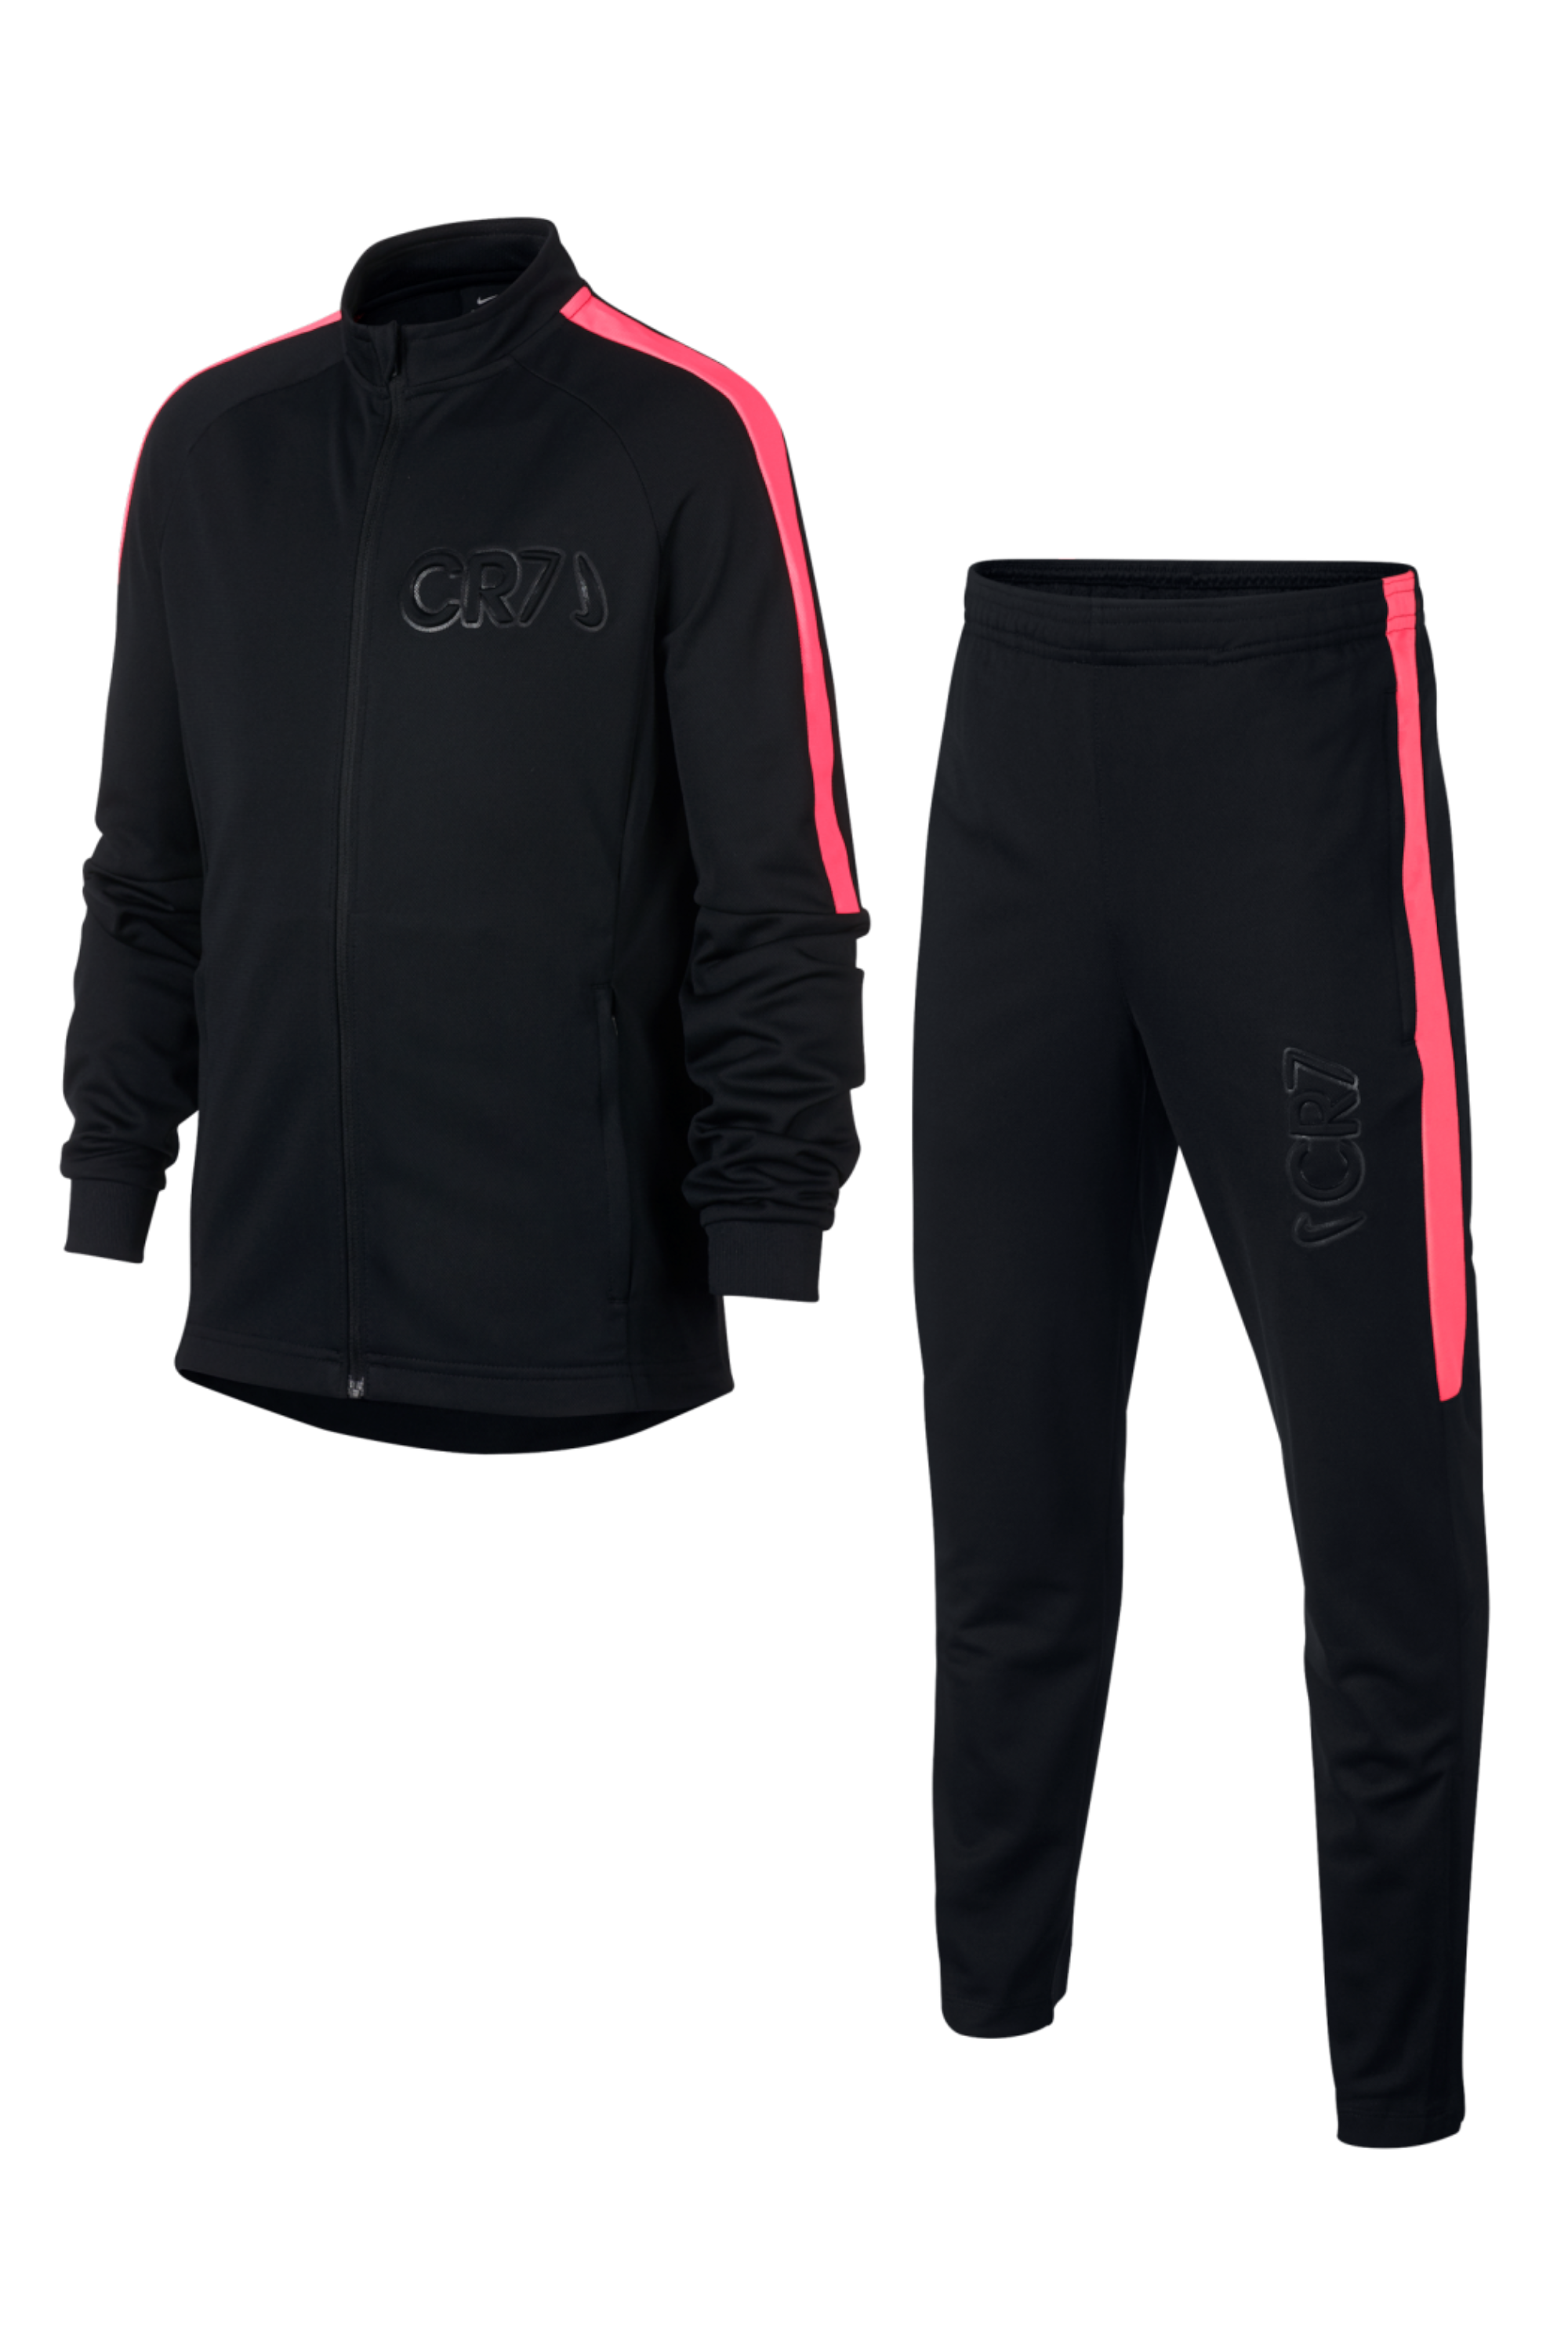 Tracksuit Nike CR7 Dry Track Suit 